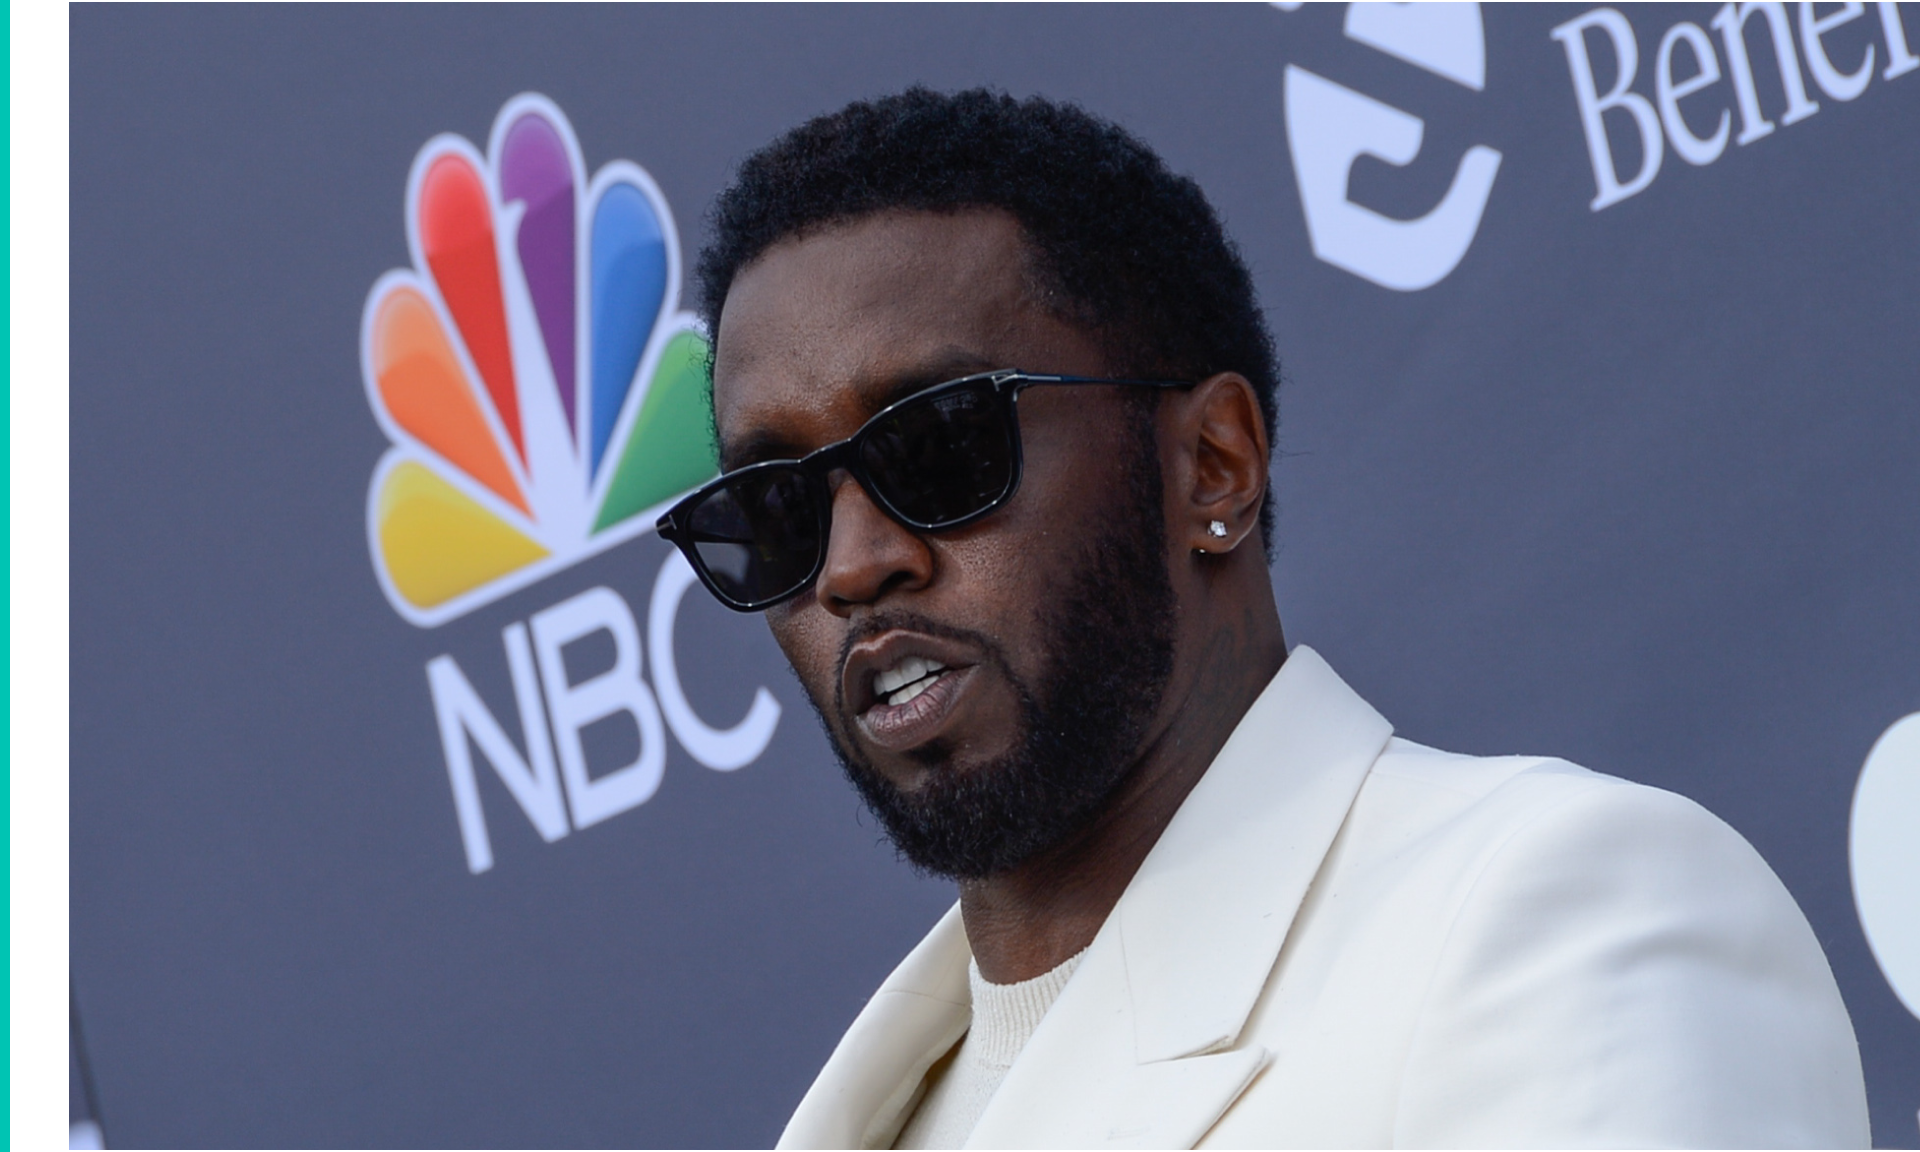 ean "Diddy" Combs attends the 2022 Billboard Music Awards at MGM Grand Garden Arena on May 15, 2022 